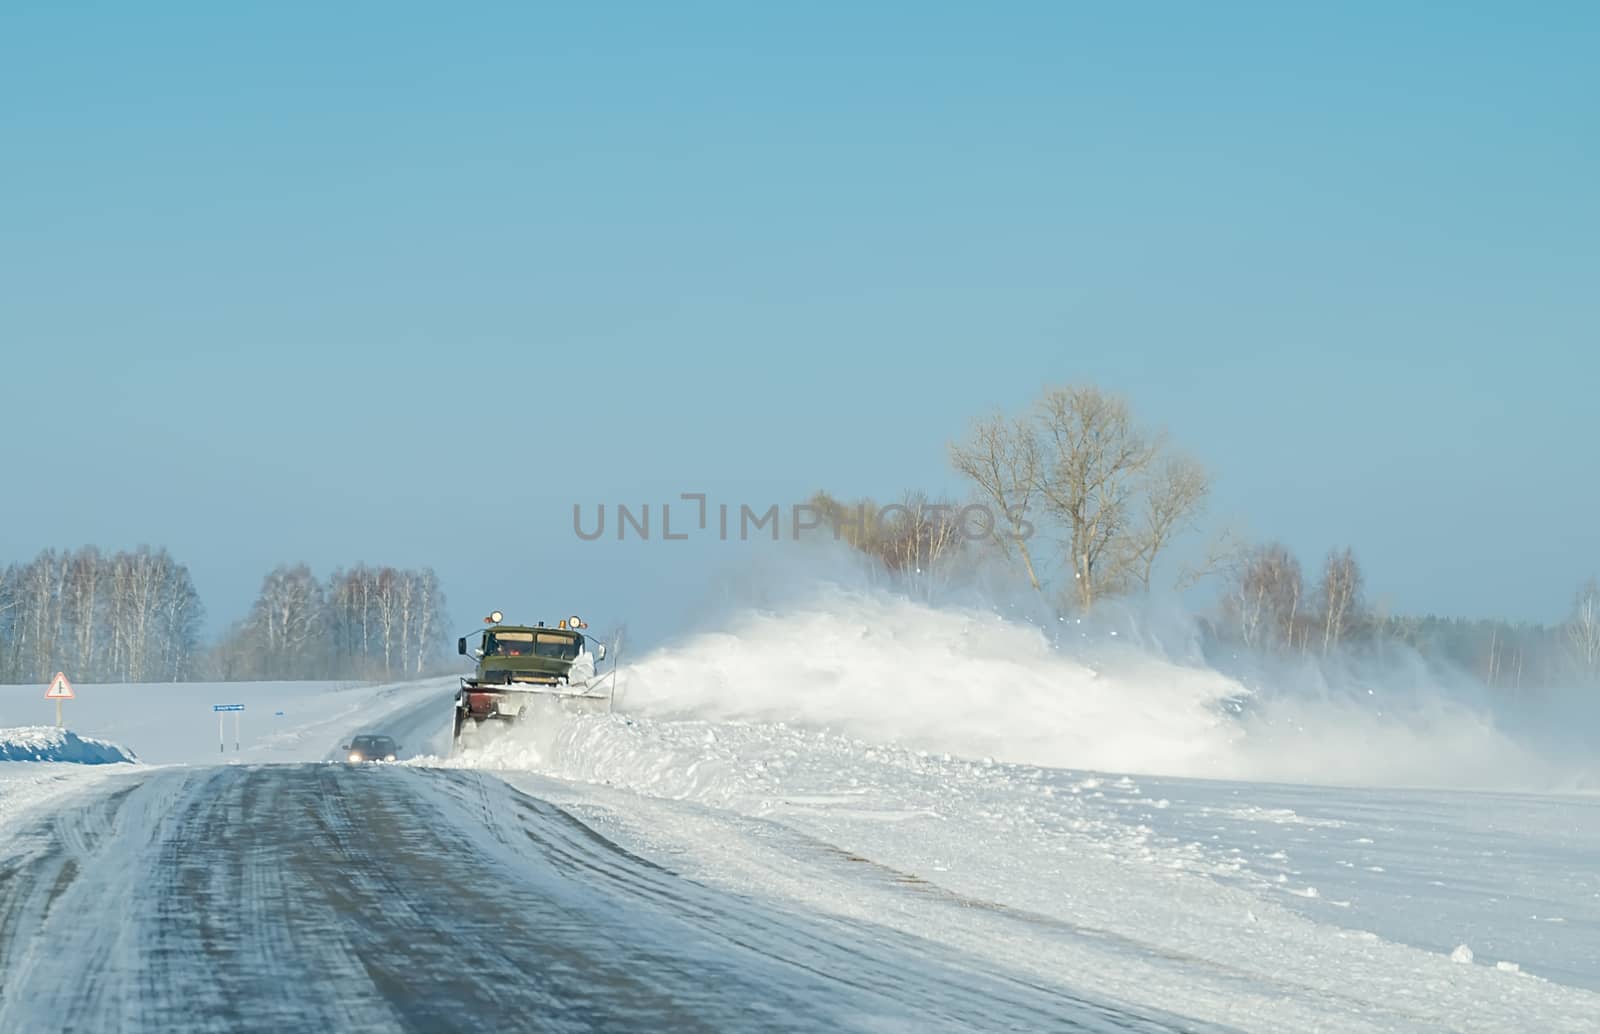 snow removal equipment, truck, winter clears the snow from the icy country road by jk3030